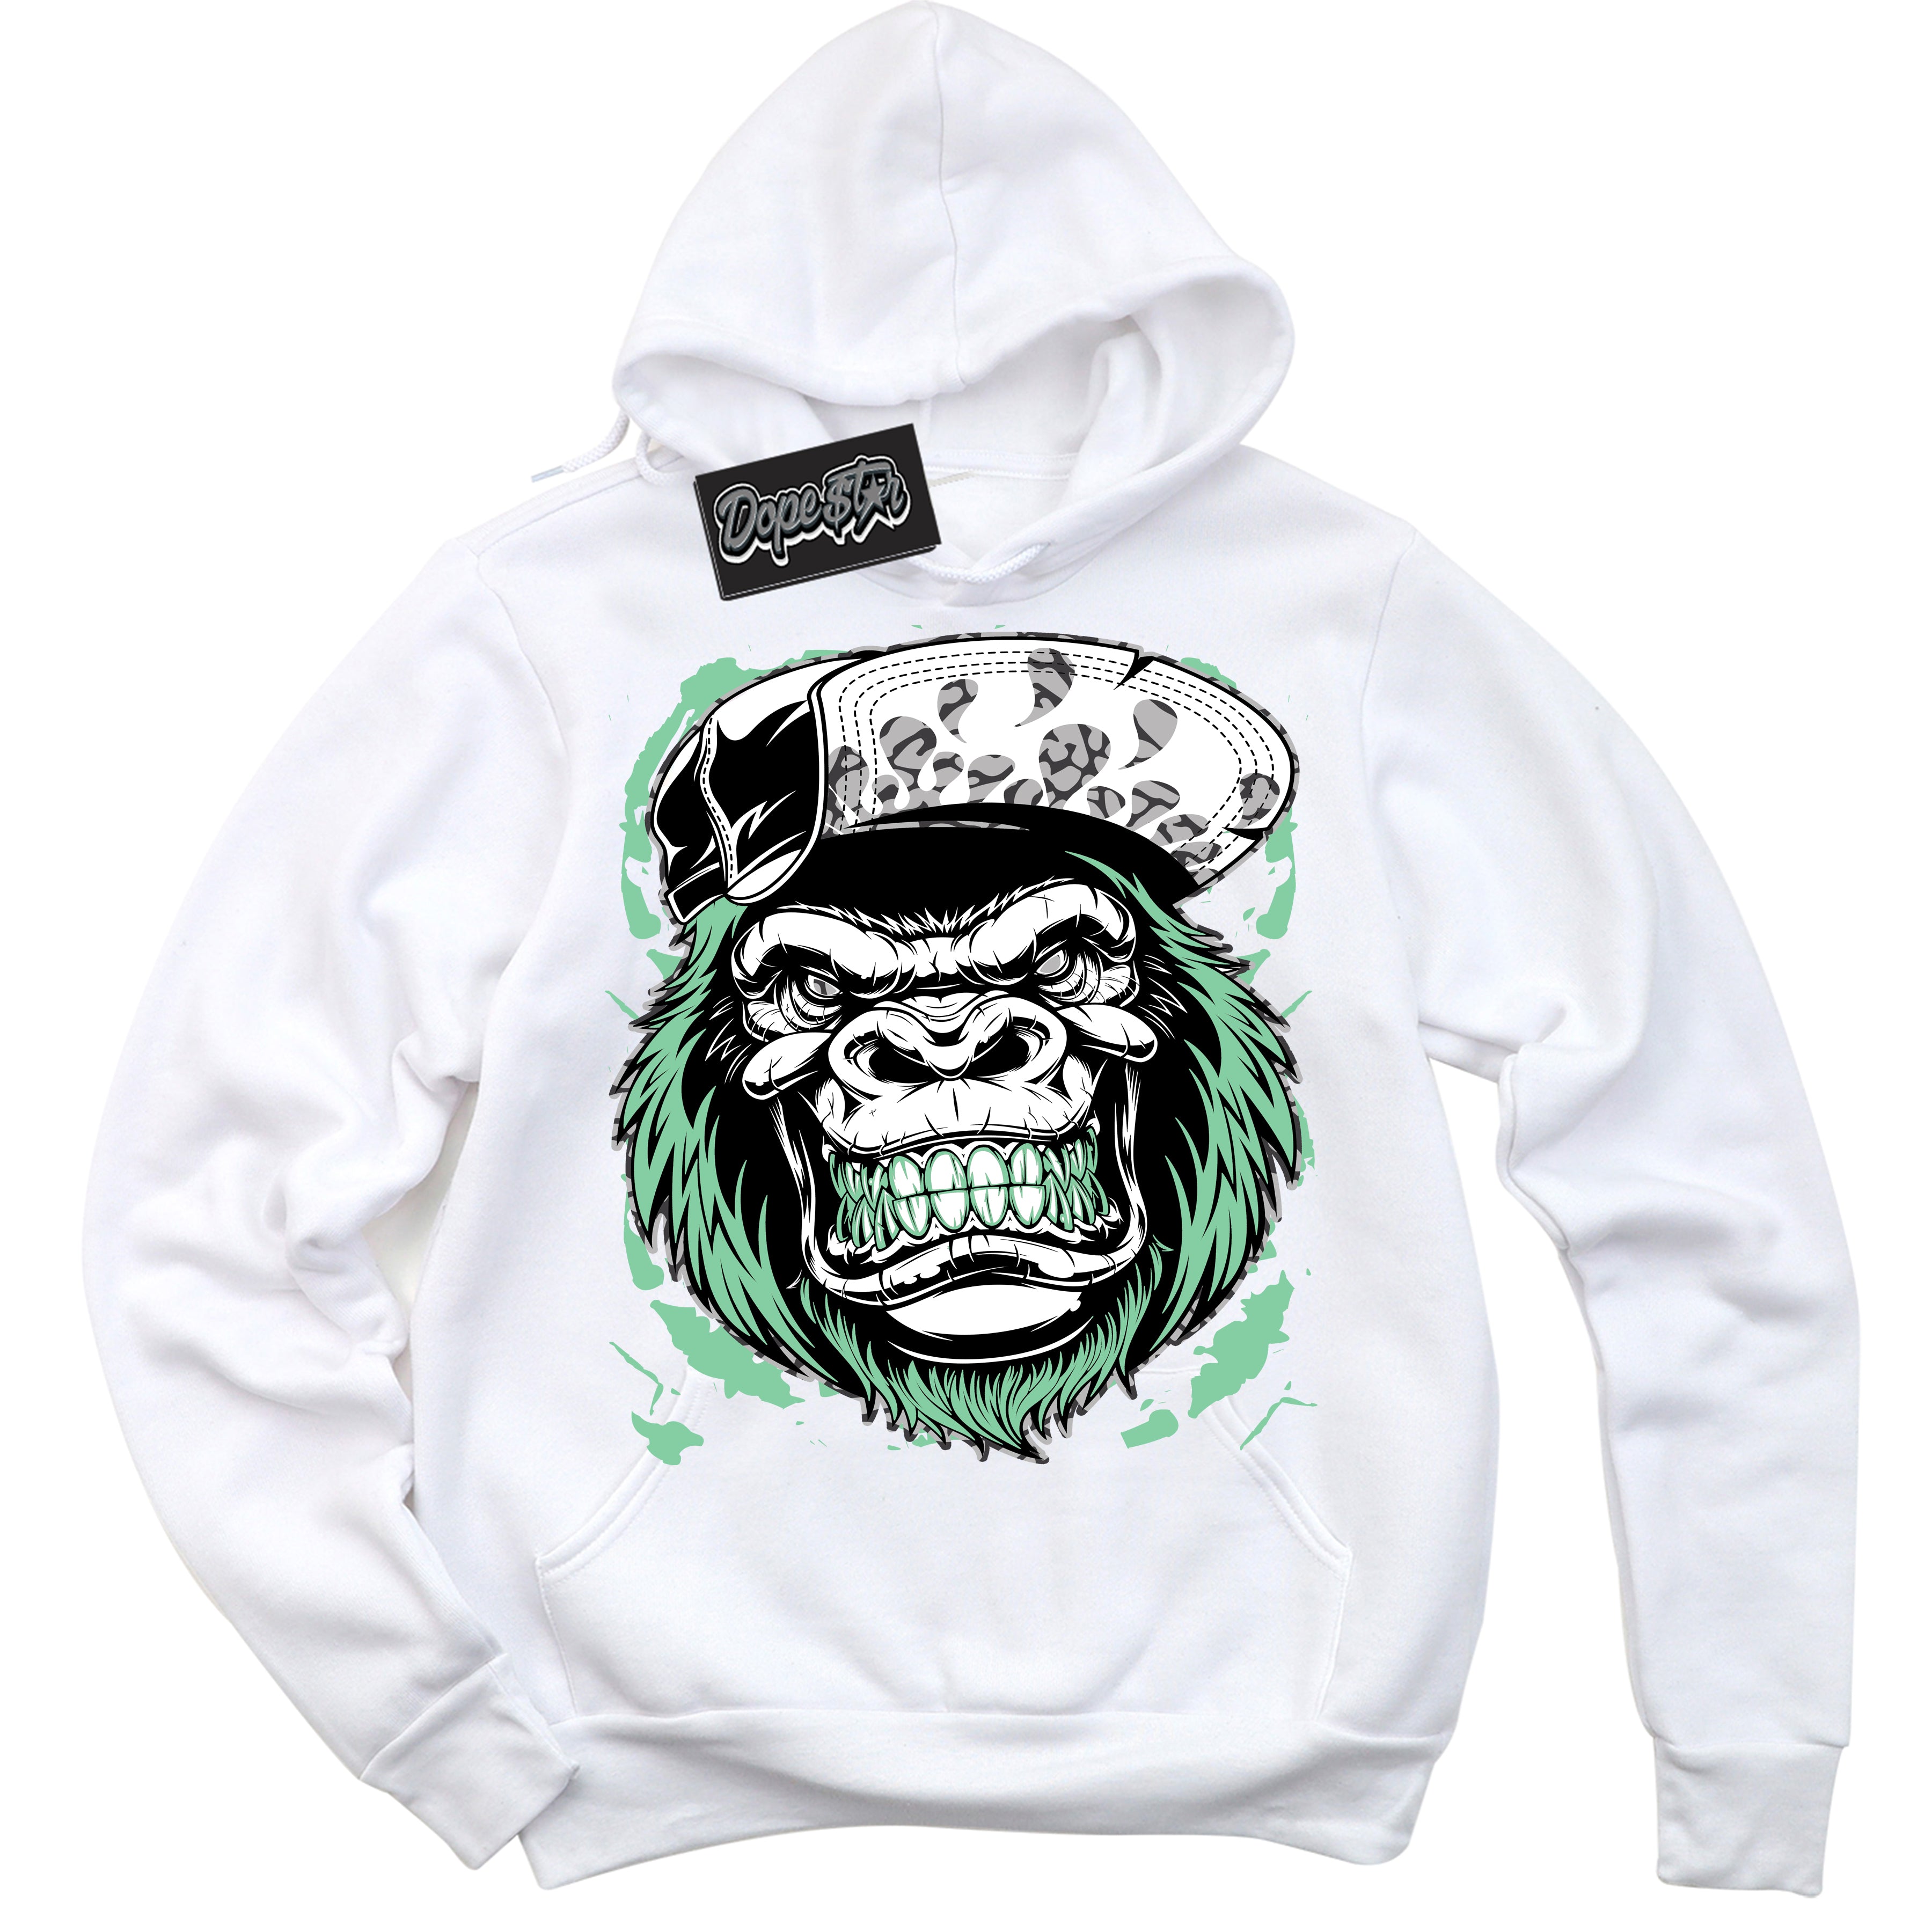 Cool White Graphic DopeStar Hoodie with “ Gorilla Beast “ print, that perfectly matches Green Glow 3s sneakers